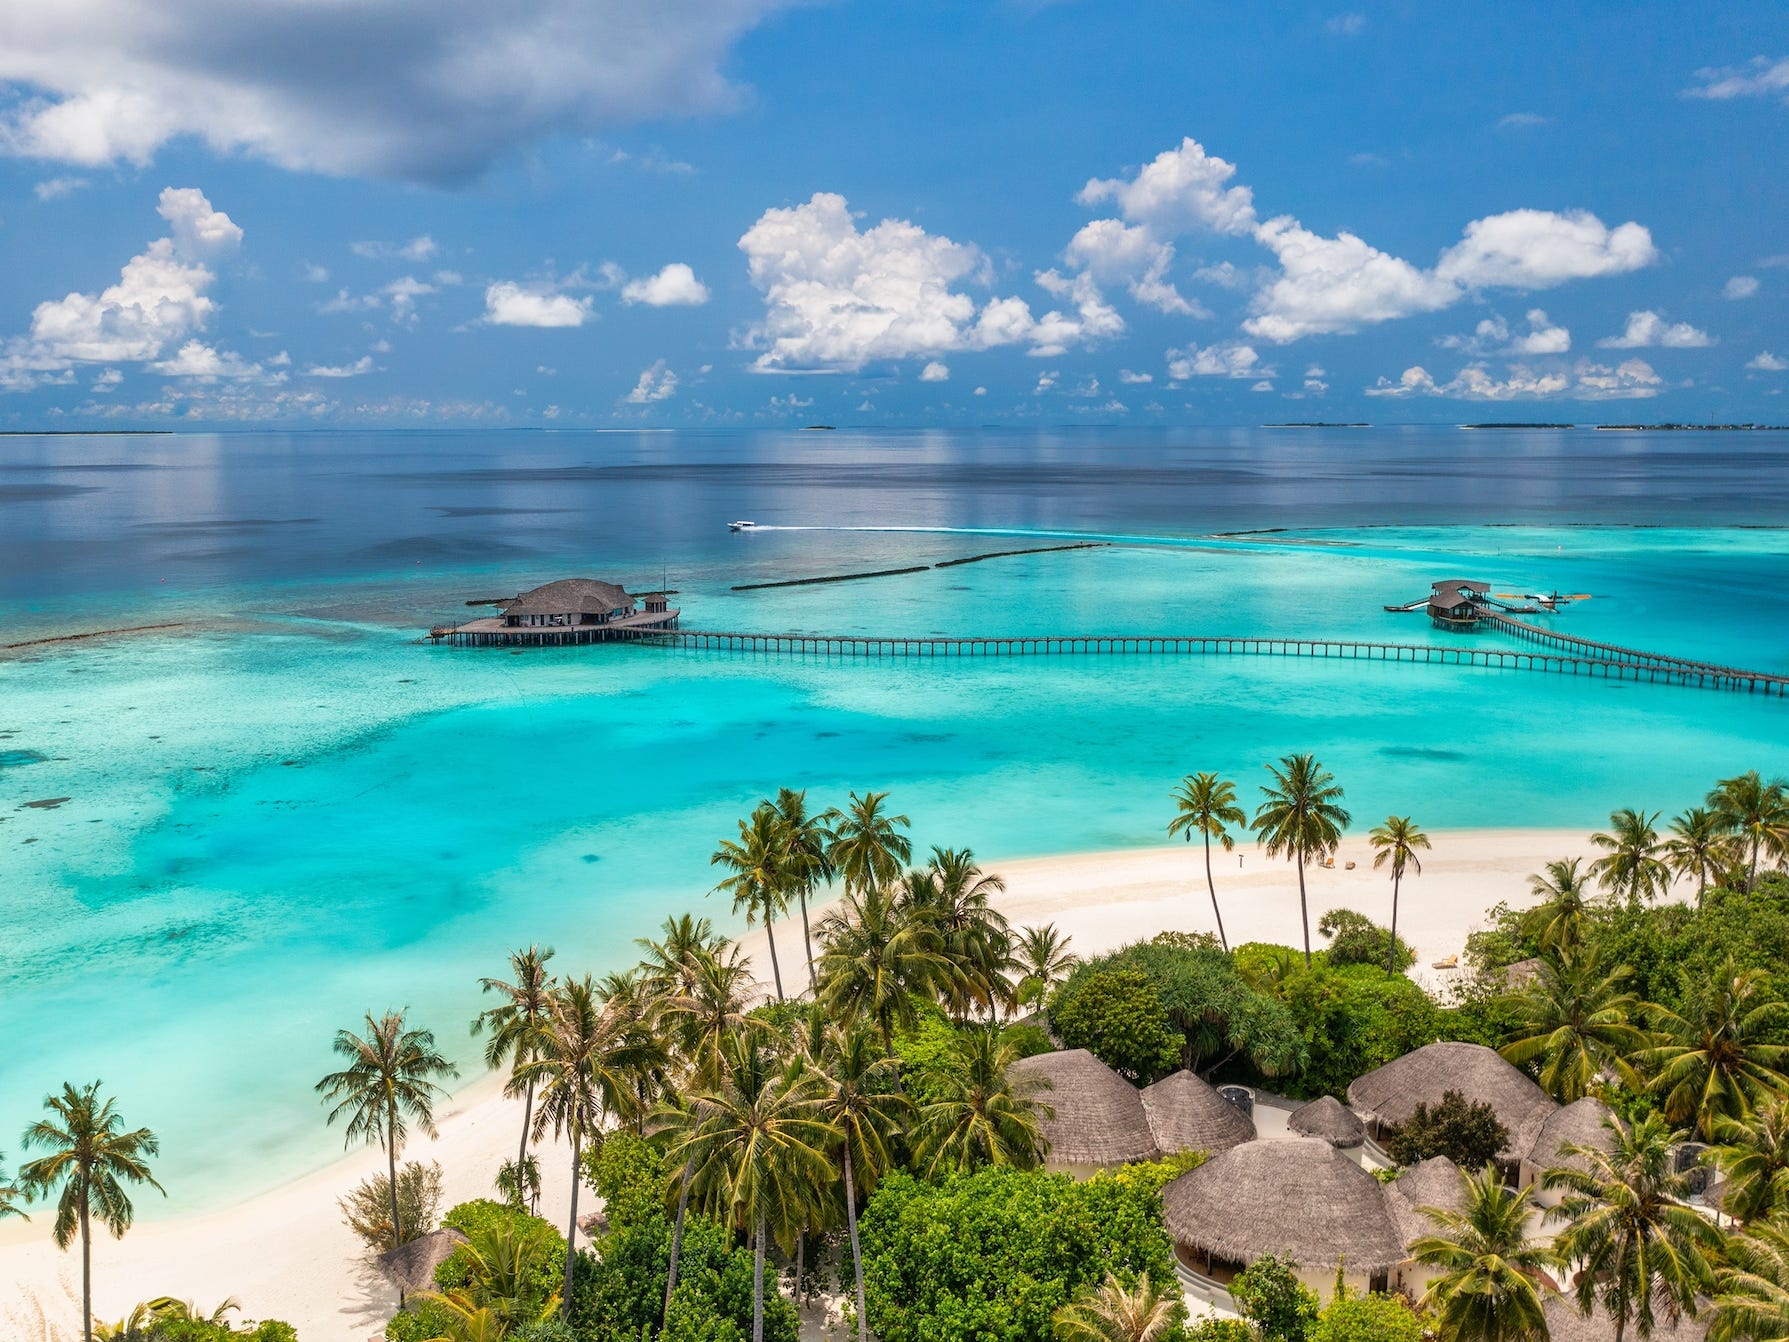 <p>The Maldives, a remote set of islands in the Indian Ocean, offers a plethora of <a href="https://www.businessinsider.com/romantic-destinations-places-family-travel-2024-2">resort options for couples</a> and families, but Baglioni Maldives is my favorite.</p><p>For many in the US, getting to the islands can be daunting — there are very few direct commercial flights, and it can take almost an entire day. But it's hard to beat the country's <a href="https://www.businessinsider.com/four-seasons-at-the-surf-club-miami-luxury-hotel-review-2023-12">luxury accommodations</a> and gorgeous landscape.</p><p>The Maldives also has some of the most beautiful marine life and coveted spots for snorkeling and scuba diving.</p>